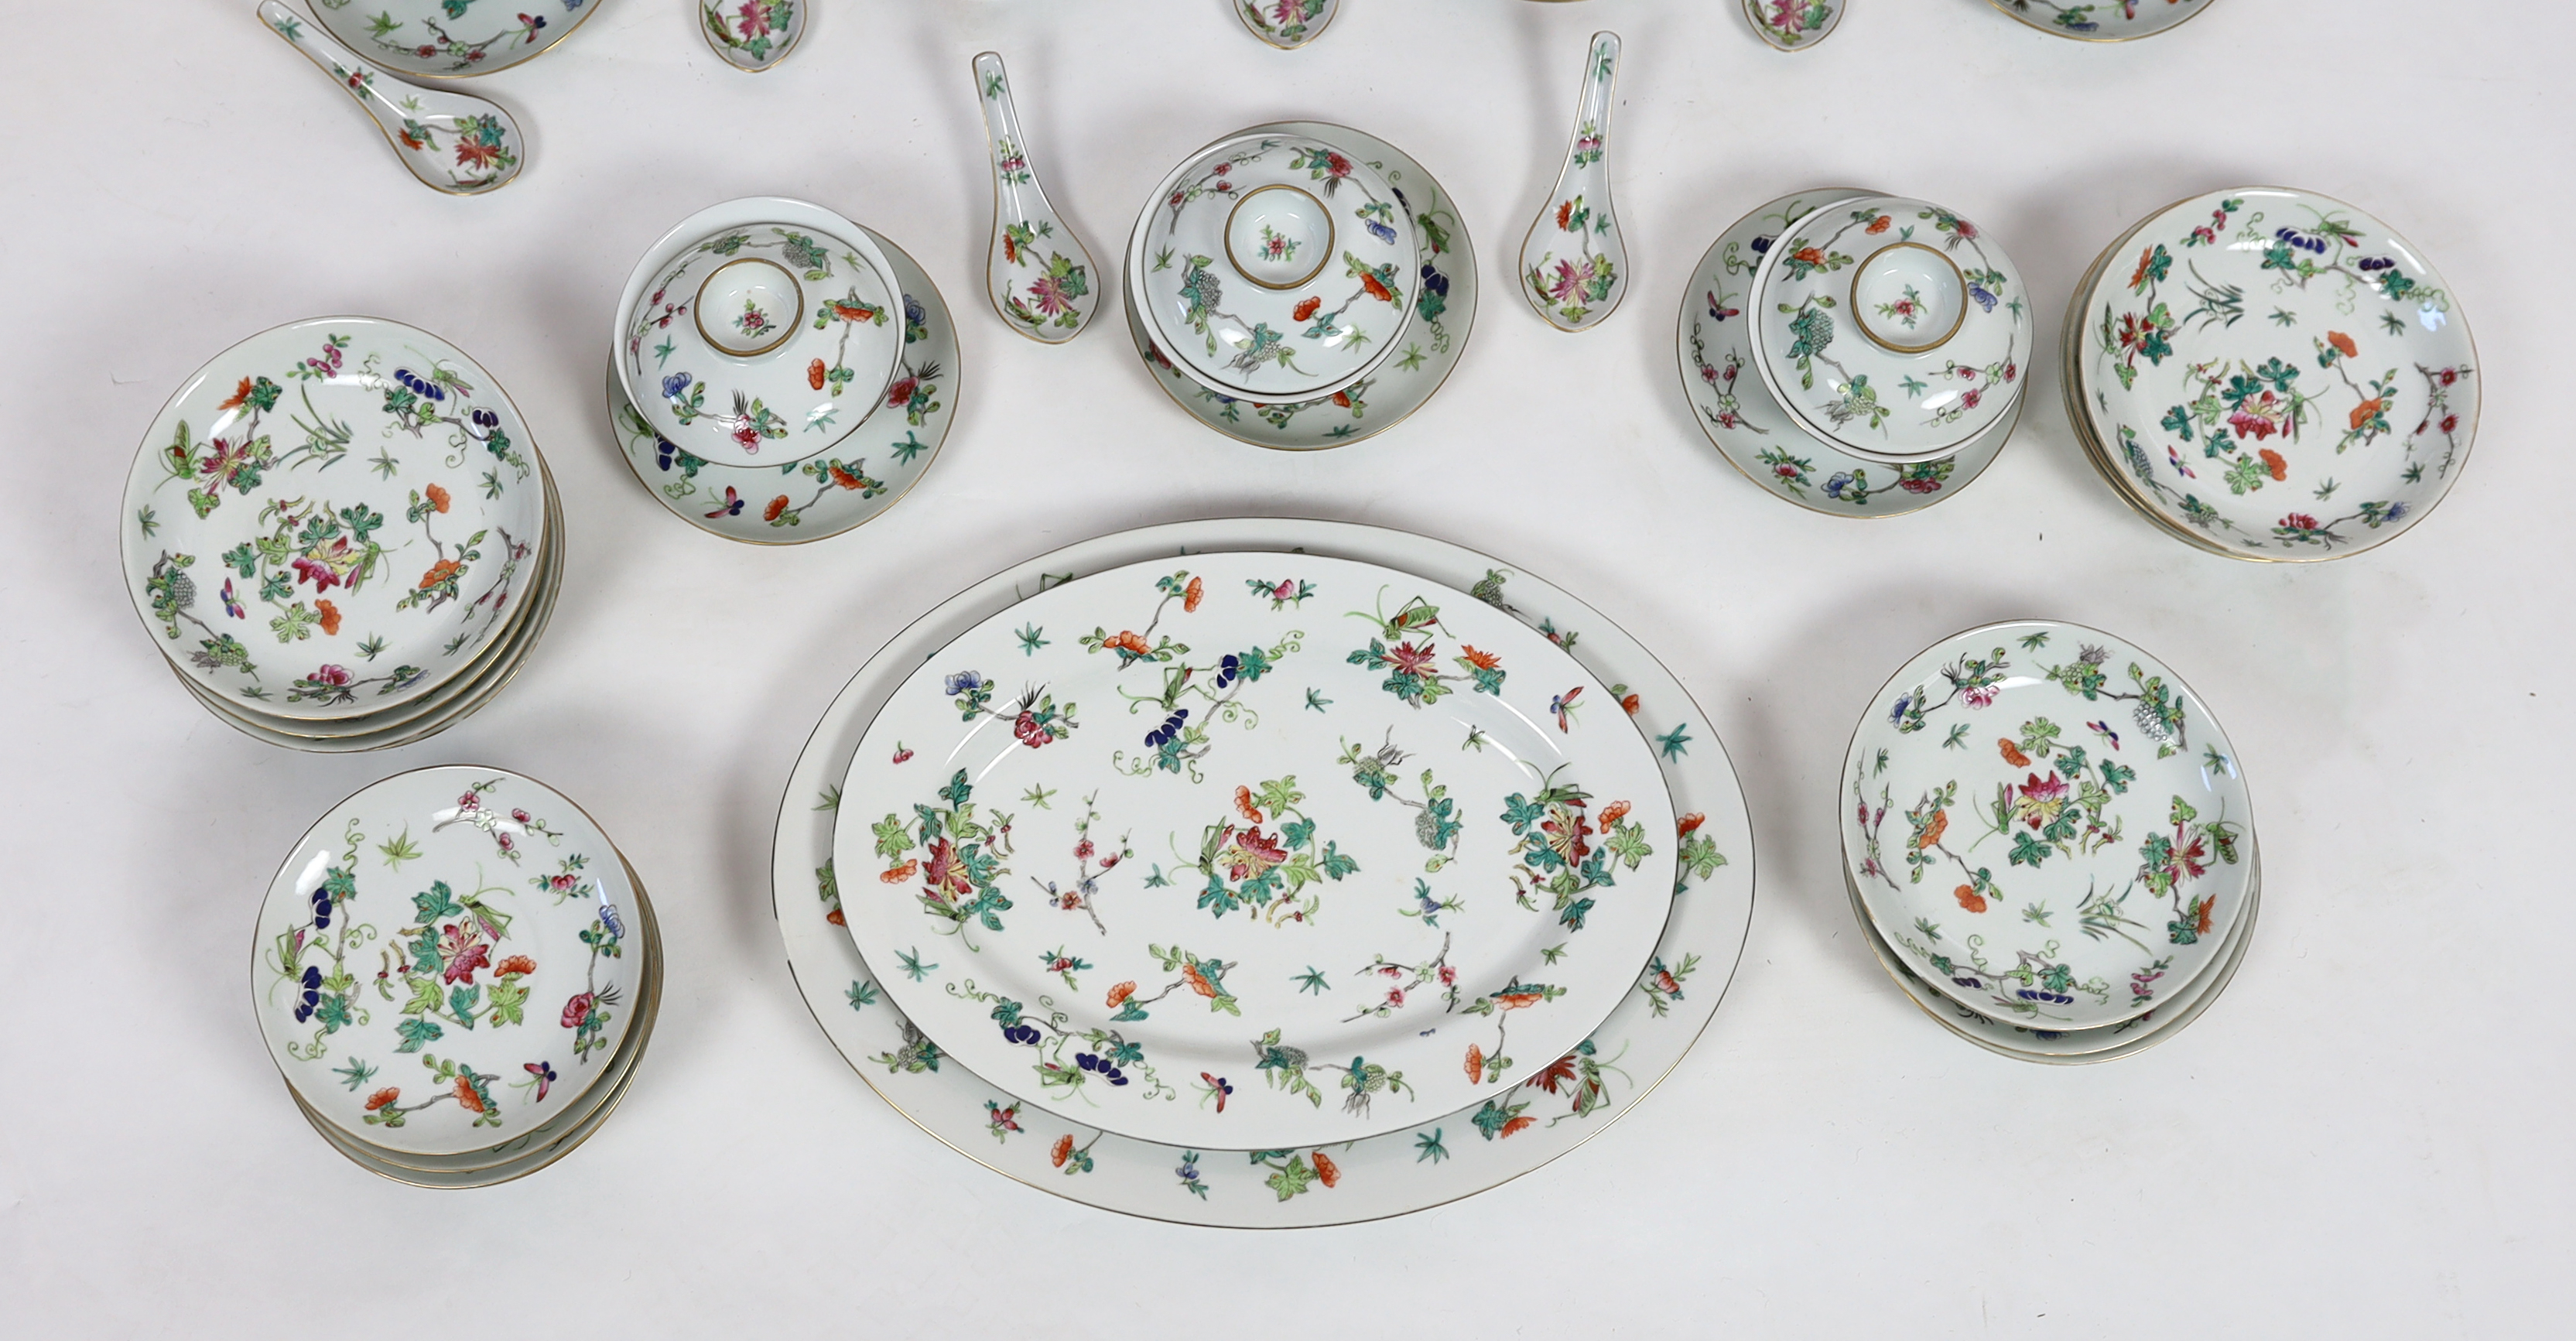 A large Chinese famille rose table service, late Qing/early Republic period